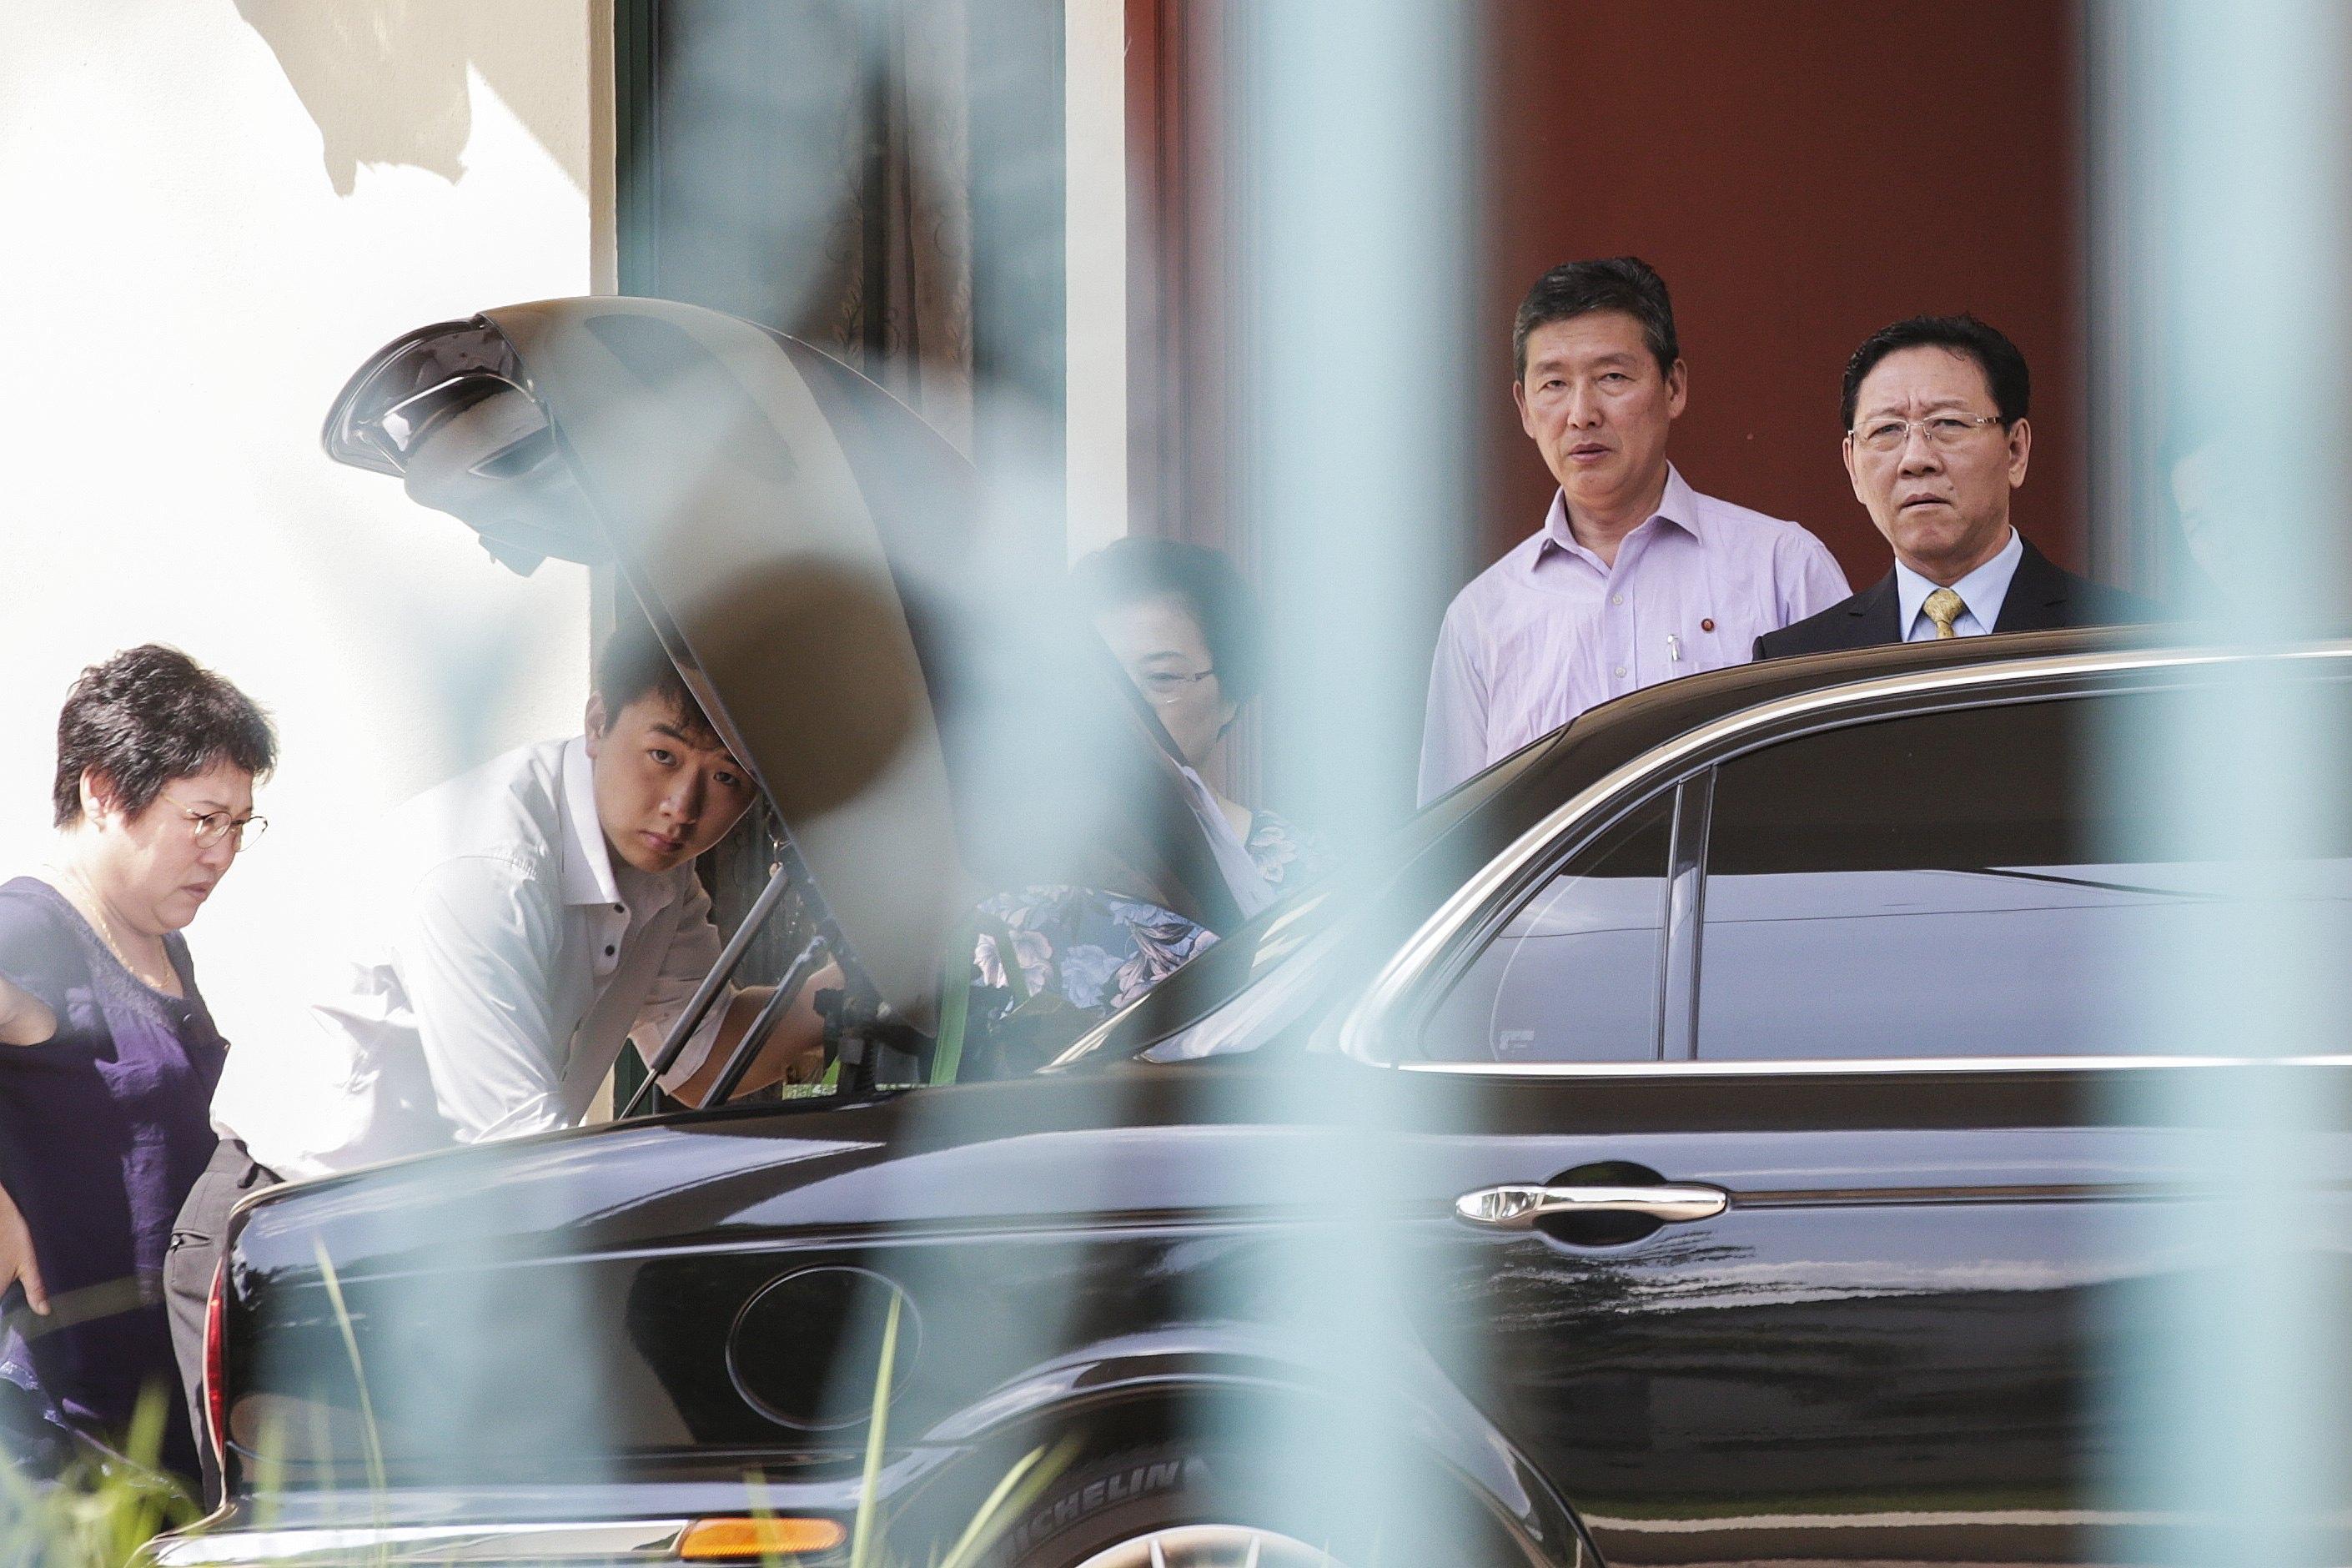 epa05832458 North Korea's ambassador to Malaysia, Kang Chol (R), reacts while leaving the North Korean embassy in Kuala Lumpur, Malaysia, 06 March 2016. Others are not identified. Malaysia's government said on 04 March it would expel North Korea's Ambassador to Malaysia who has been declared 'persona non grata' and was ordered to leave the country within 48 hours, after he said Malaysia's investigation into the murder of Kim Jong-nam could not be trusted. Kim Jong-nam, a.k.a. Kim Chol, was attacked by two women with chemical sprays at a Kuala Lumpur airport on 13 February. According to authorities, the police are seeking arrest for a senior official at the North Korean Embassy in connection to the assassination of Kim. EPA/FAZRY ISMAIL